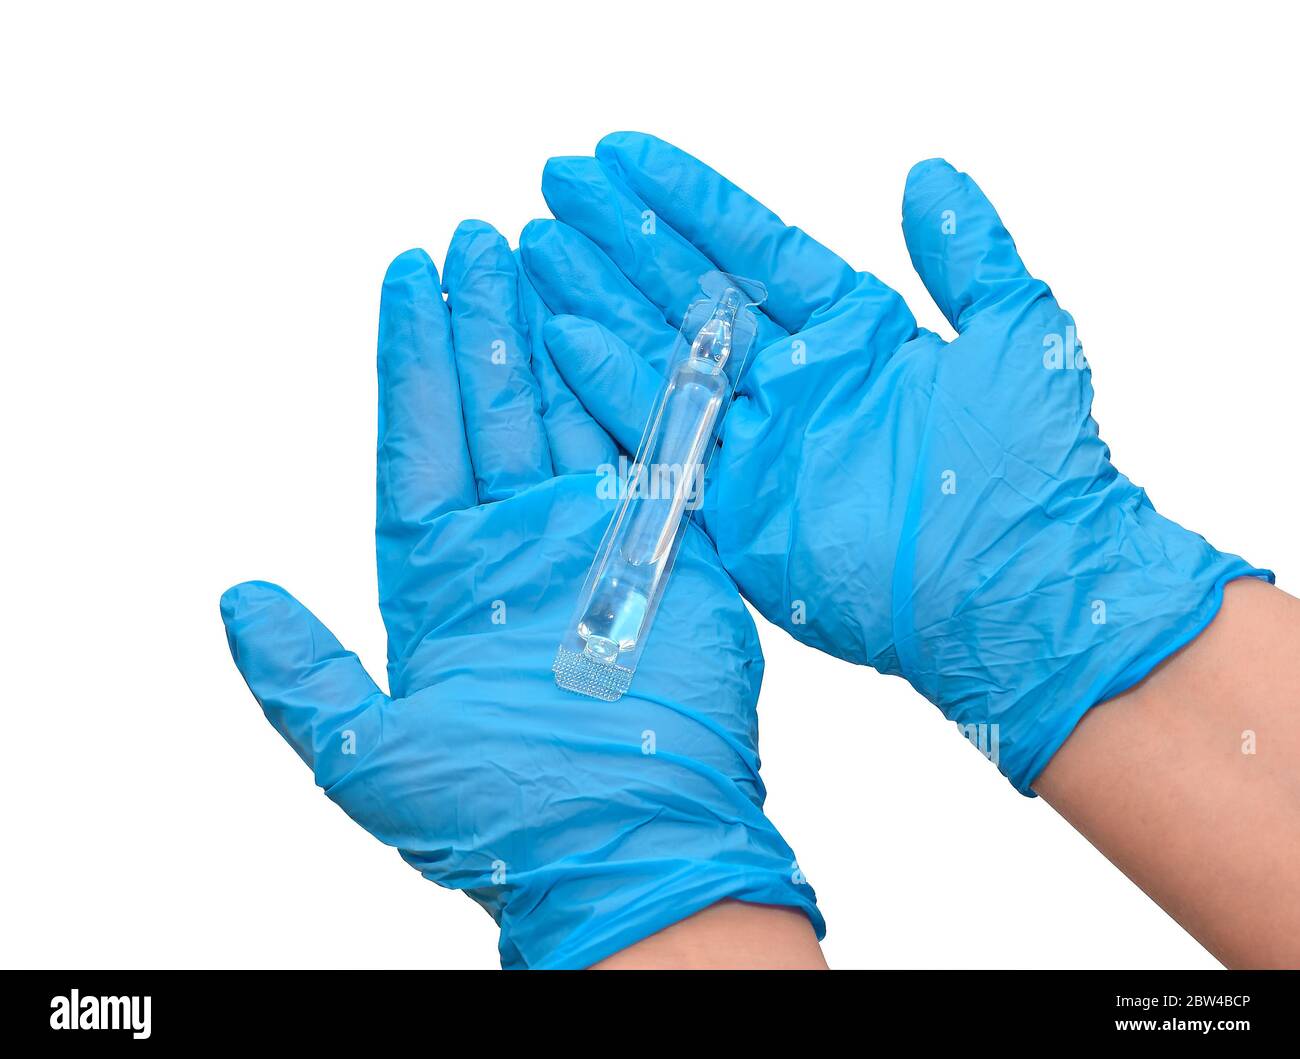 Bottle of injections in the arm, doctor's hands in medical gloves. Liquid medicine or vaccine for treating viral diseases in a laboratory or hospital. Stock Photo